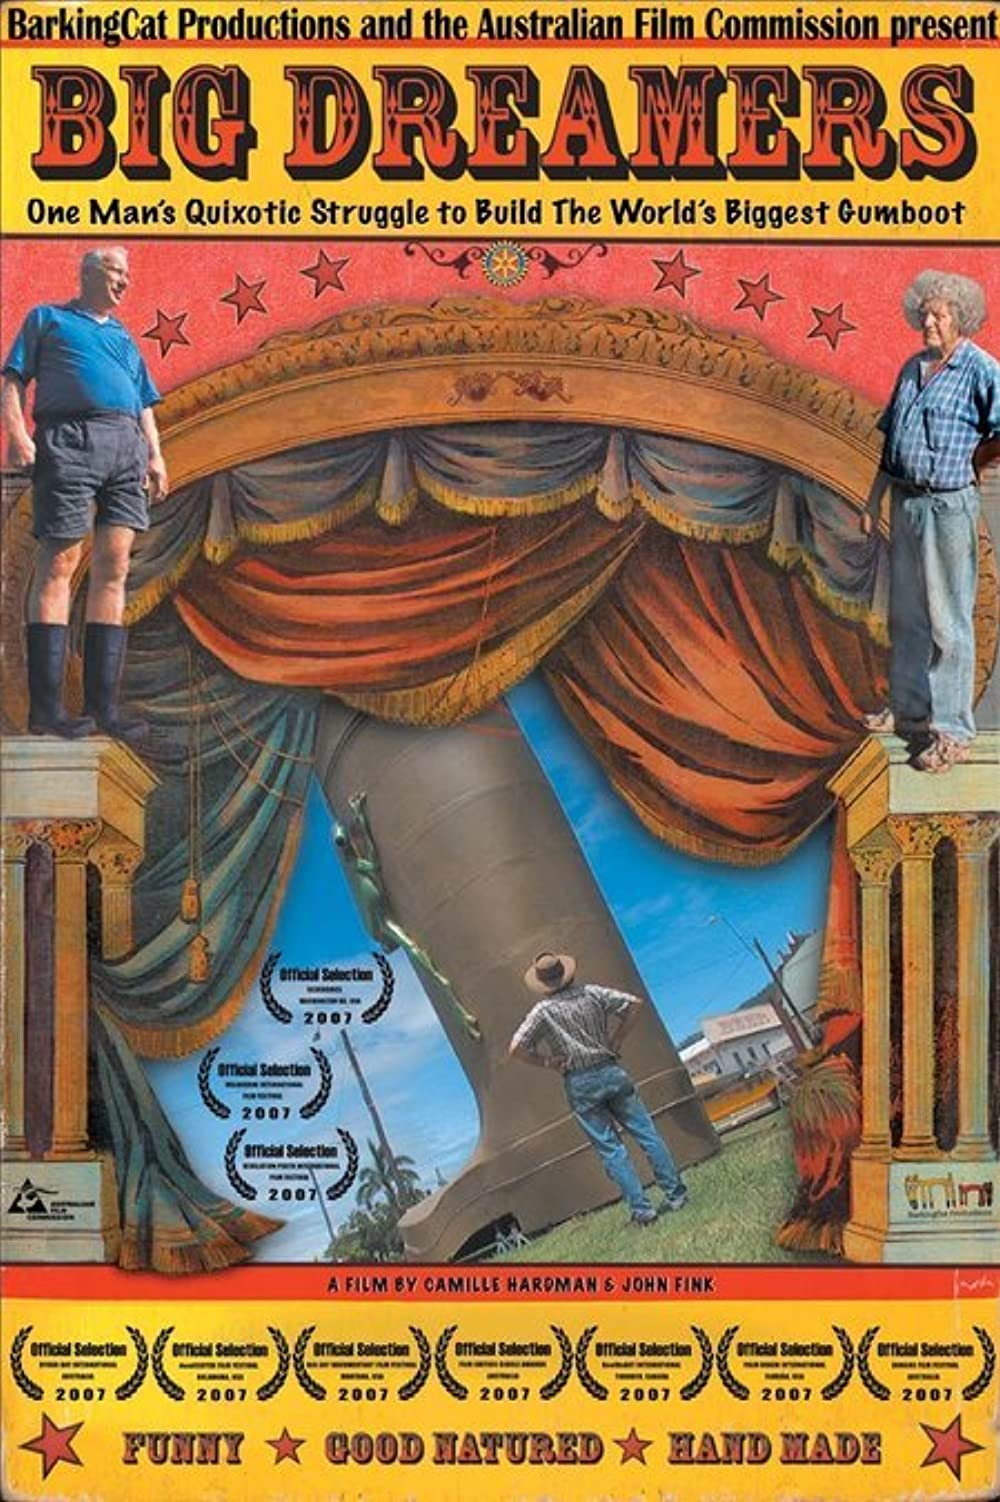 The colourful carnivalesque film poster for the Big Dreamers documentary